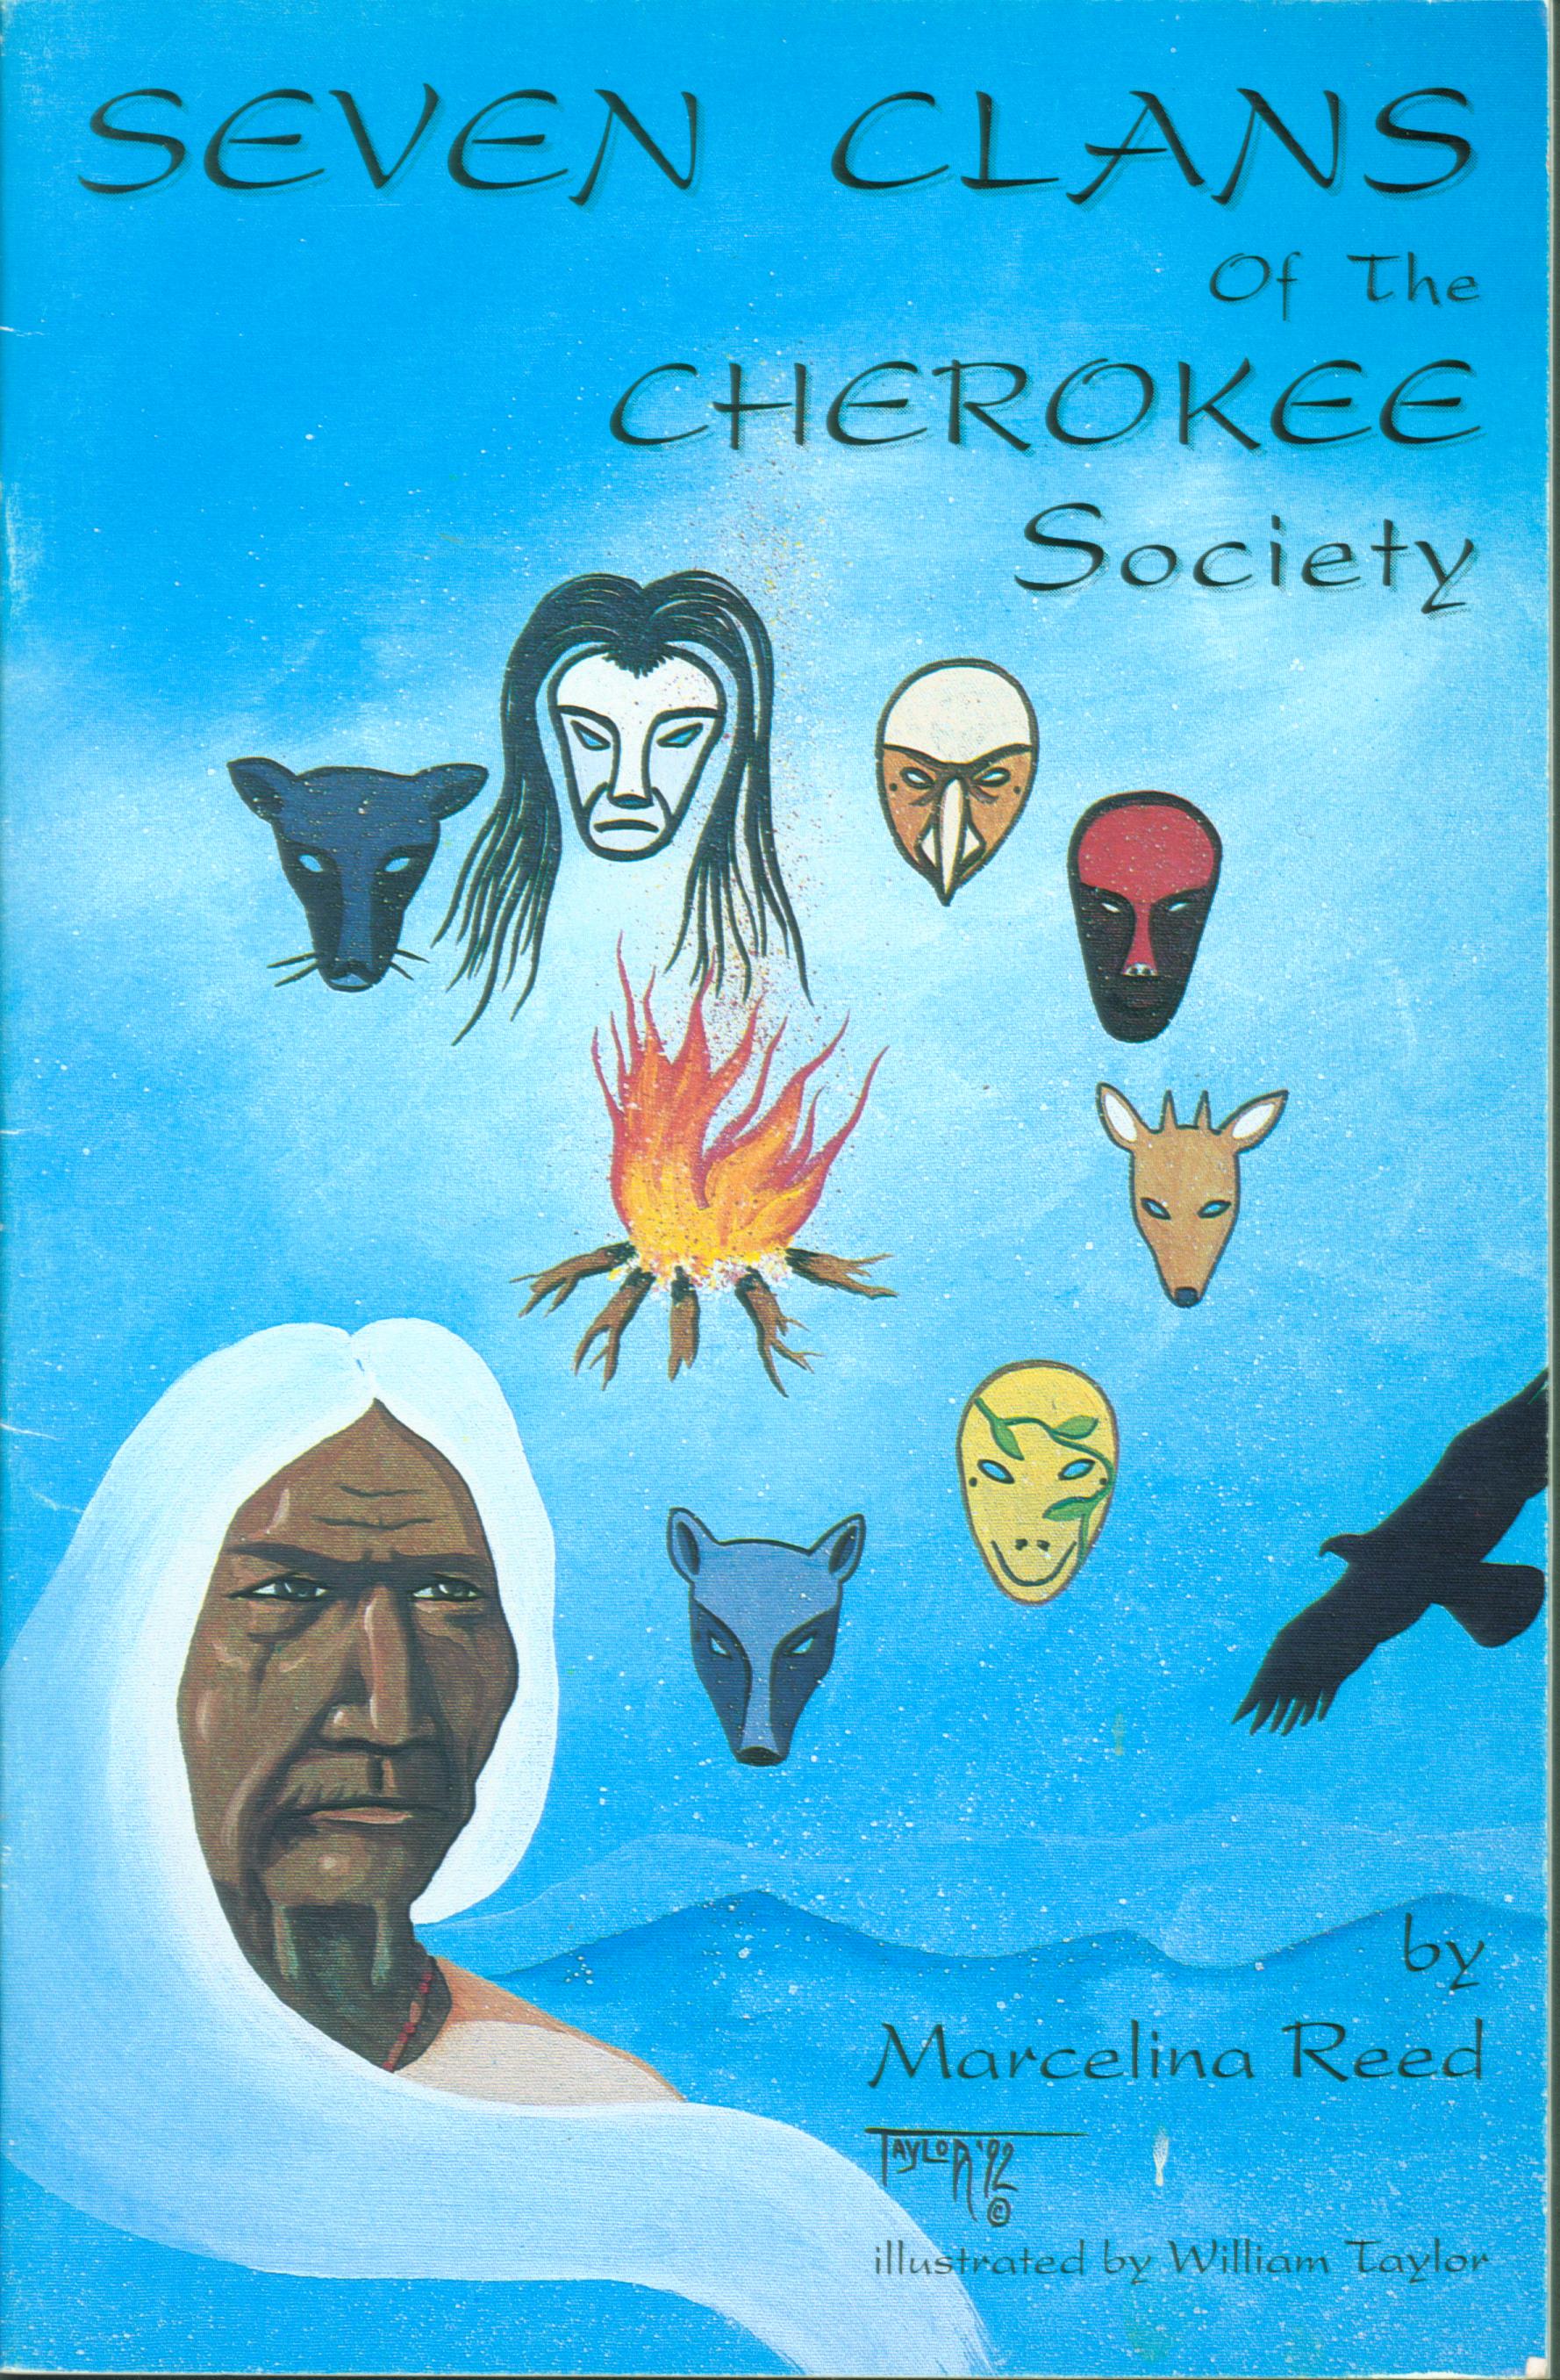 SEVEN CLANS OF THE CHEROKEE SOCIETY